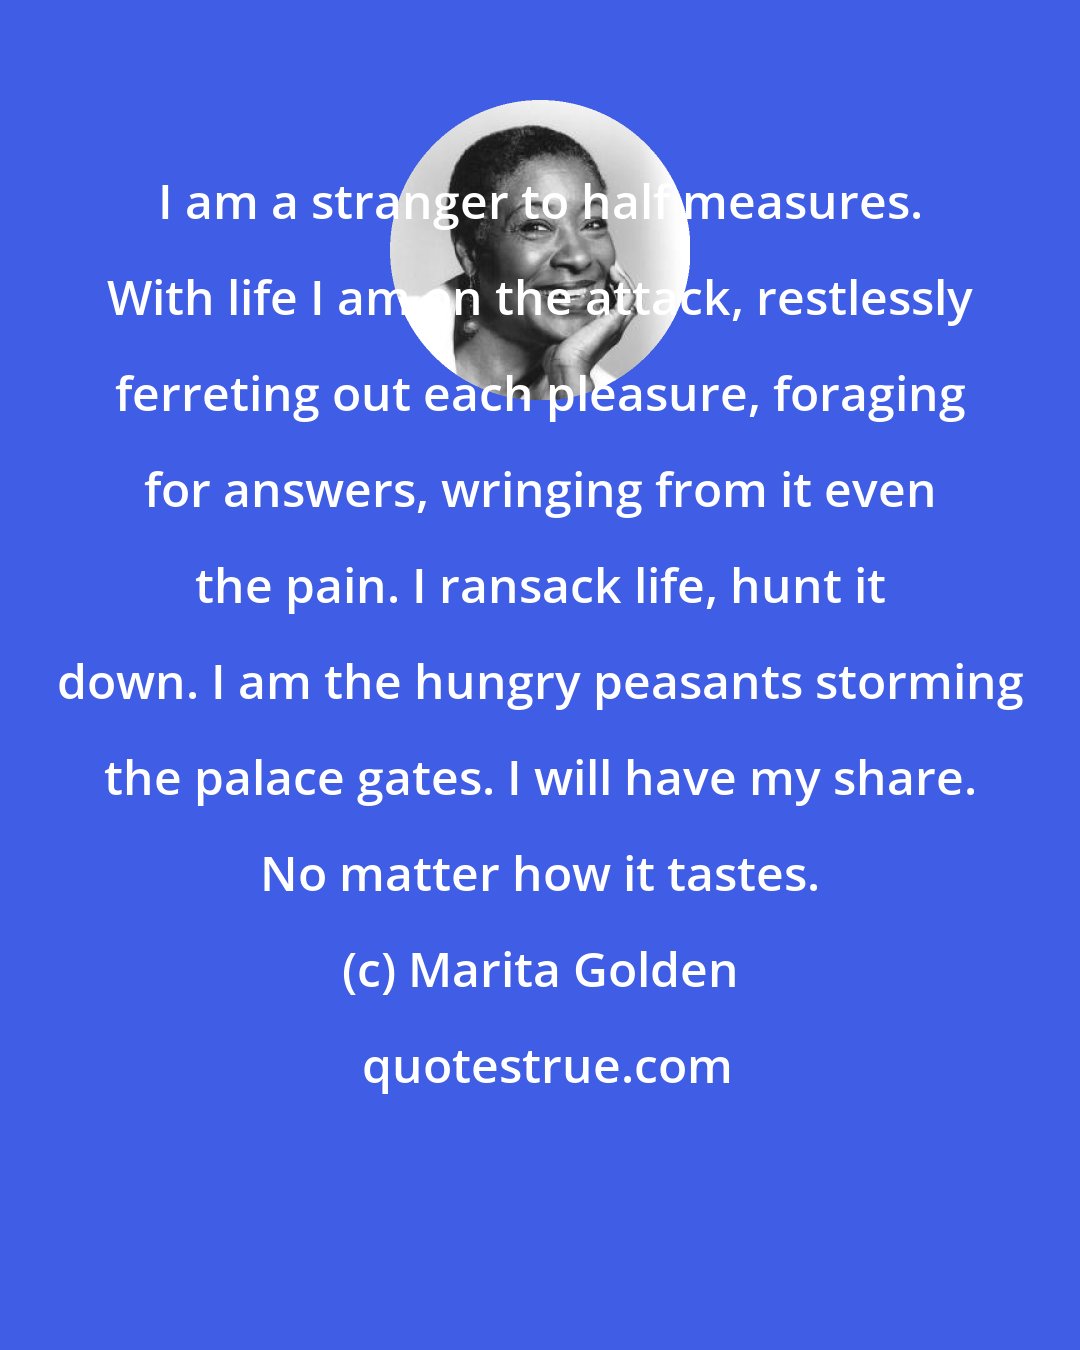 Marita Golden: I am a stranger to half measures. With life I am on the attack, restlessly ferreting out each pleasure, foraging for answers, wringing from it even the pain. I ransack life, hunt it down. I am the hungry peasants storming the palace gates. I will have my share. No matter how it tastes.